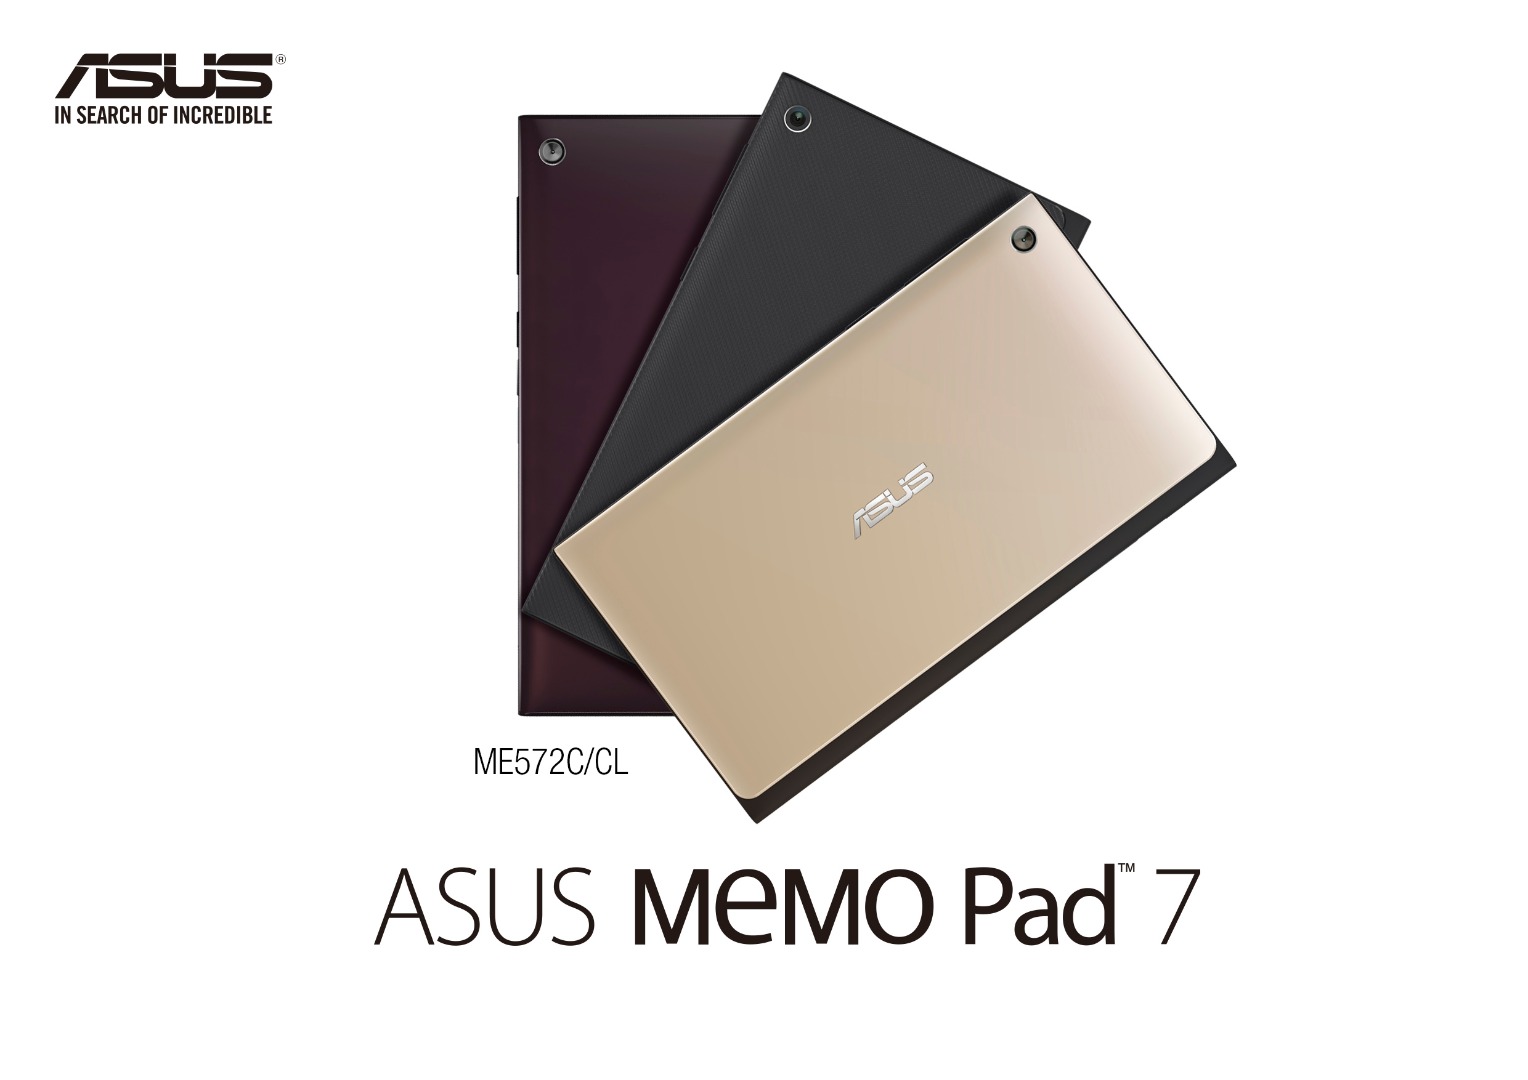 Asus Memo Pad 7 Is Another Budget Android Tablet With A 64-Bit Processor  From Intel